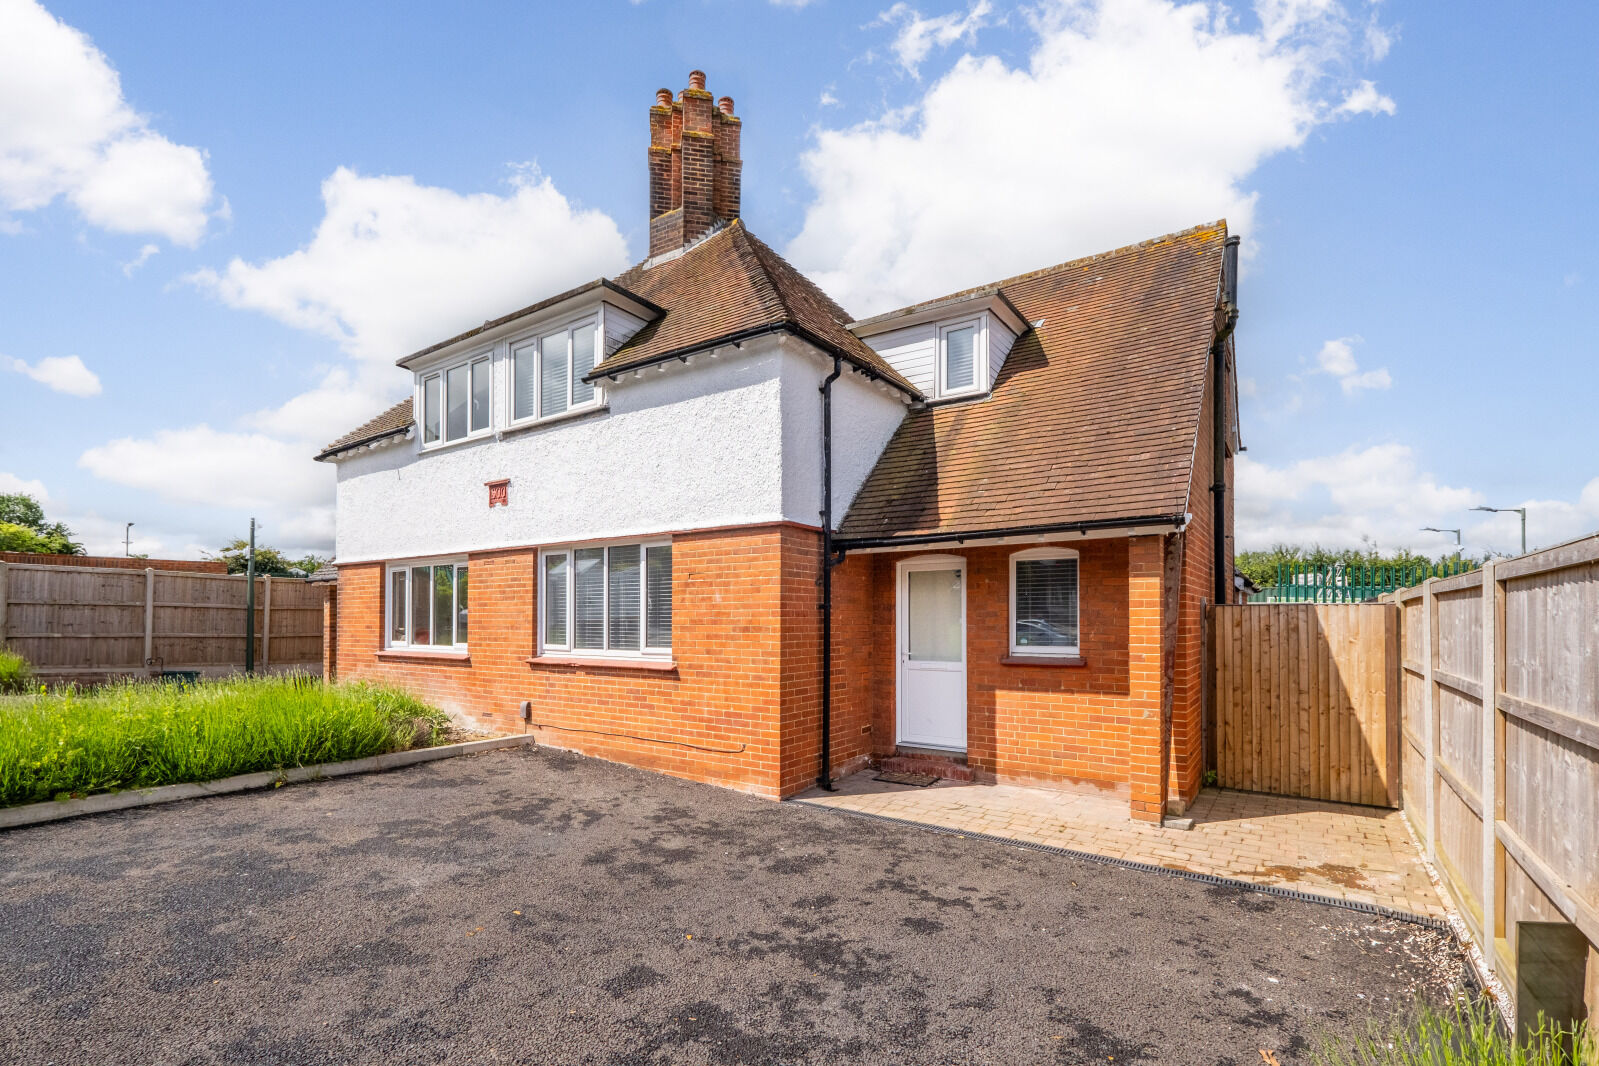 3 bedroom semi detached house to rent, Available now Woodcote Road, Wallington, SM6, main image